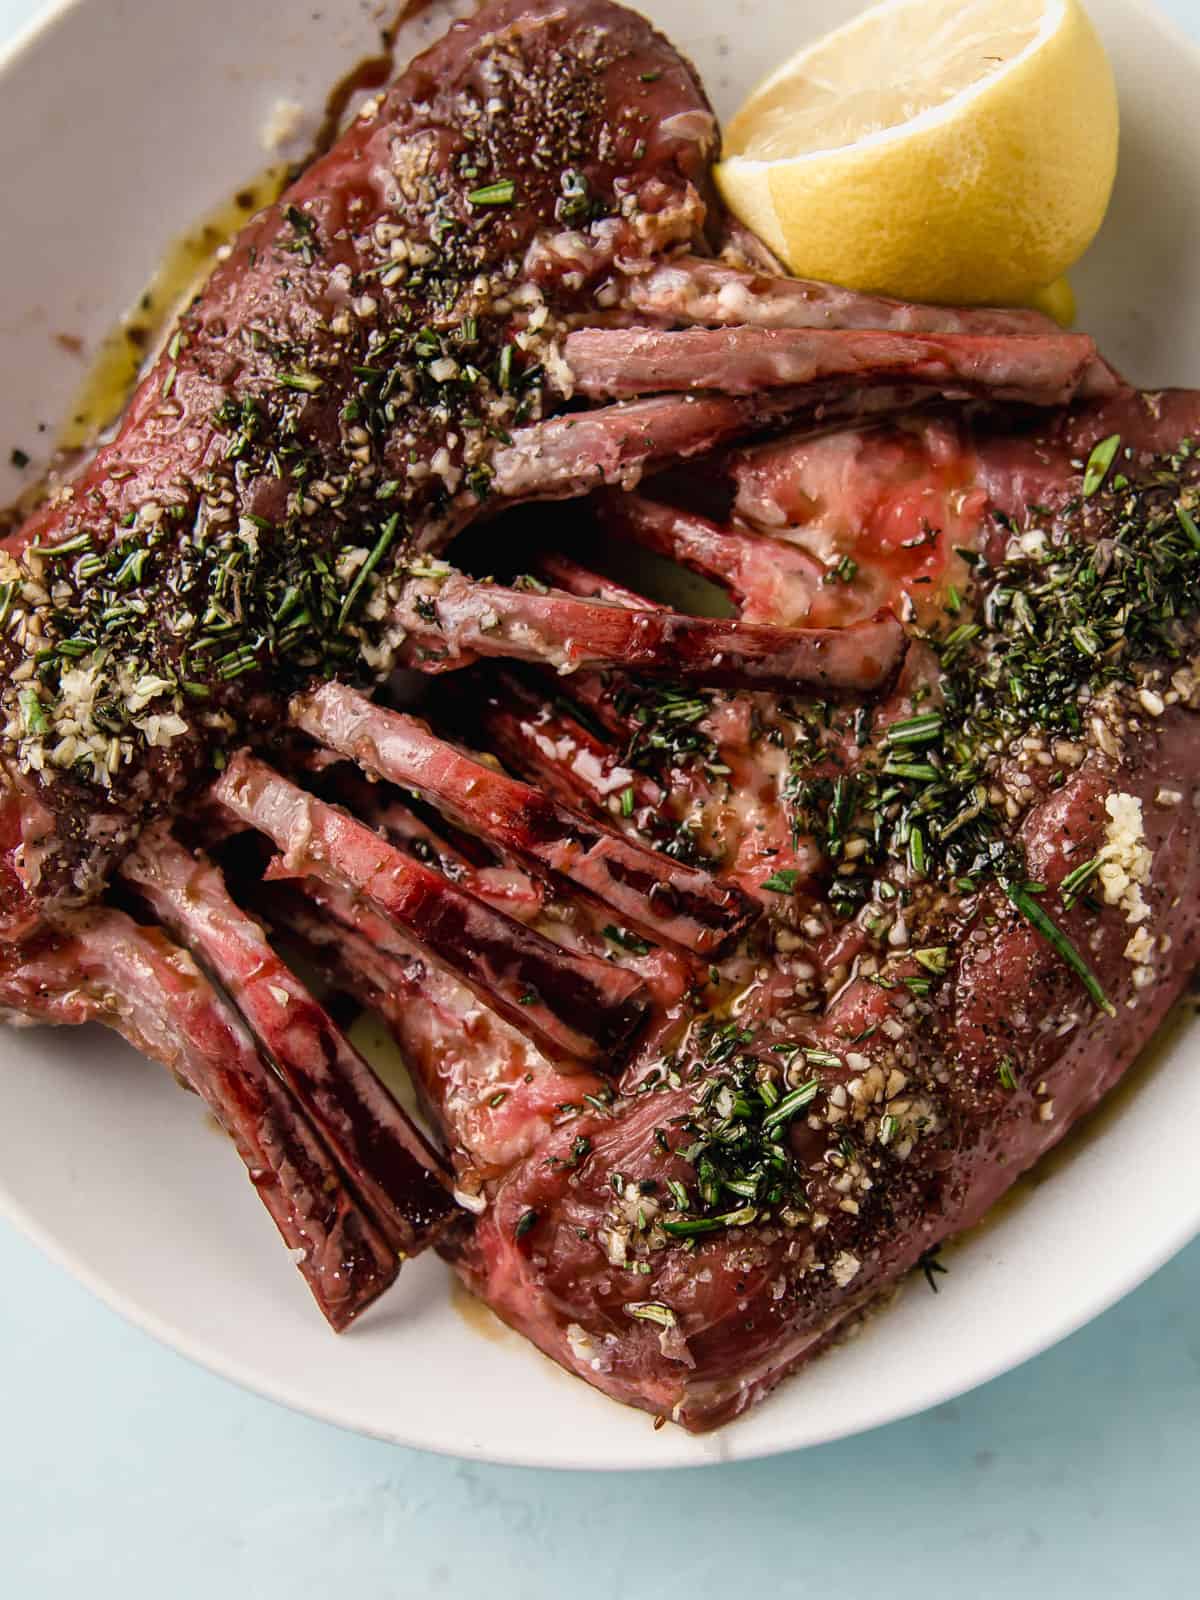 Marinate the rack of lamb with herbs and garlic.